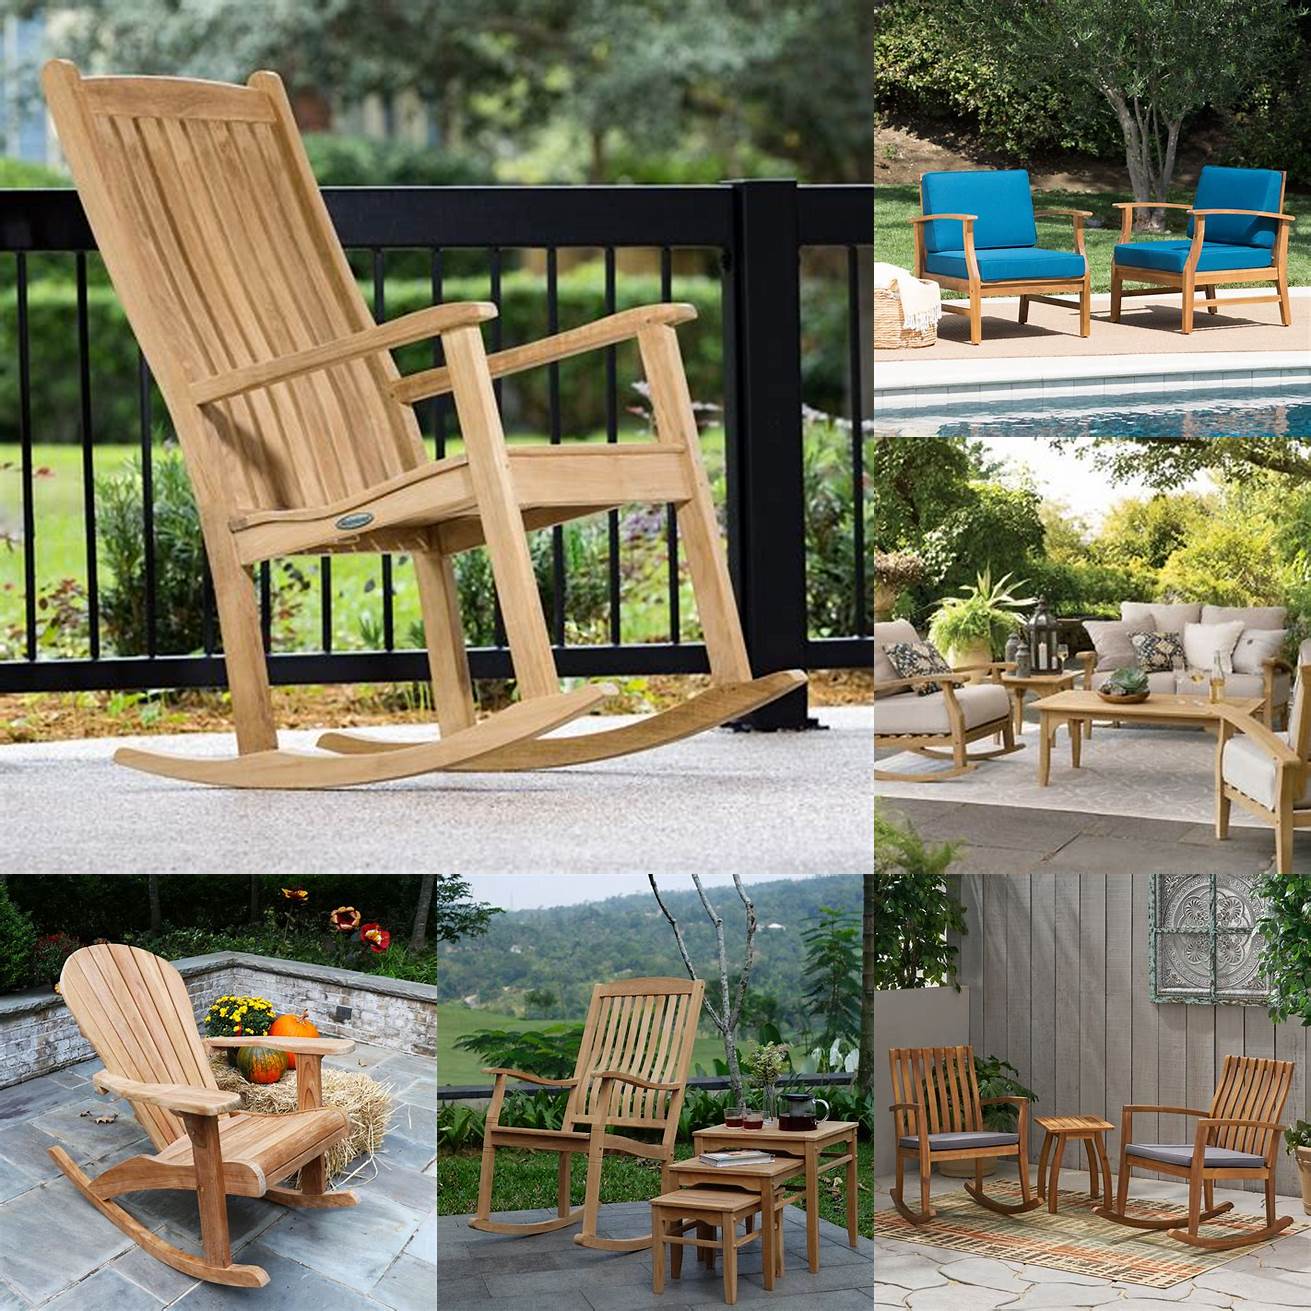 A picture of an outdoor living space with a teak rocking chair